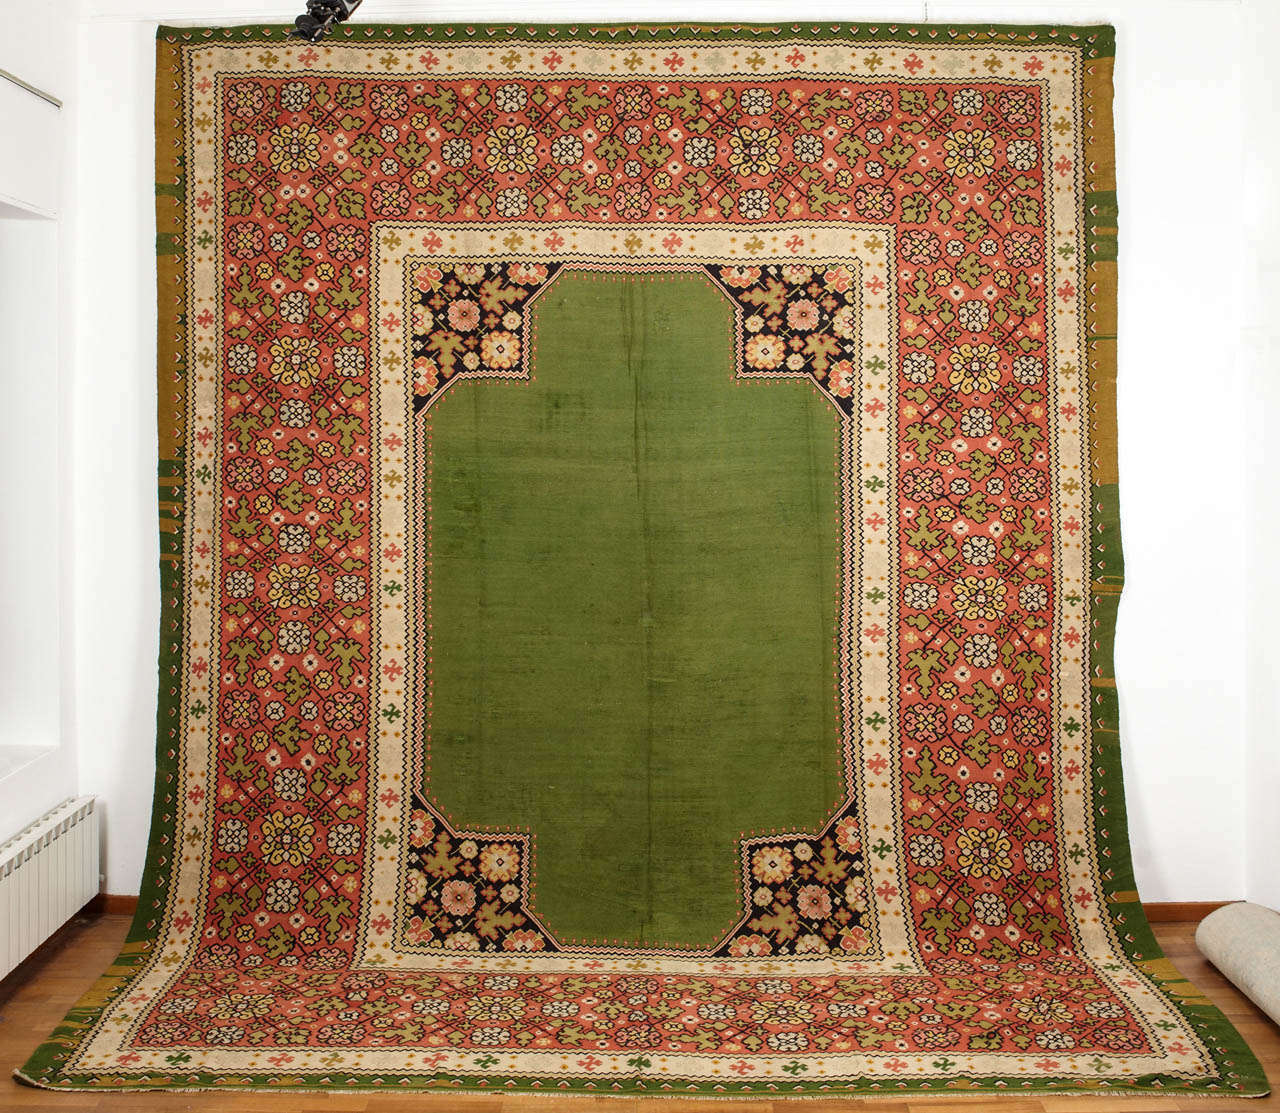 A rare and unusual Bessarabian flat-weave, characterized by a grass green open field with stylized floral spandrels and a wide border. Bessarablian kilims of such large format are very difficult to find as they probably were originally commissioned